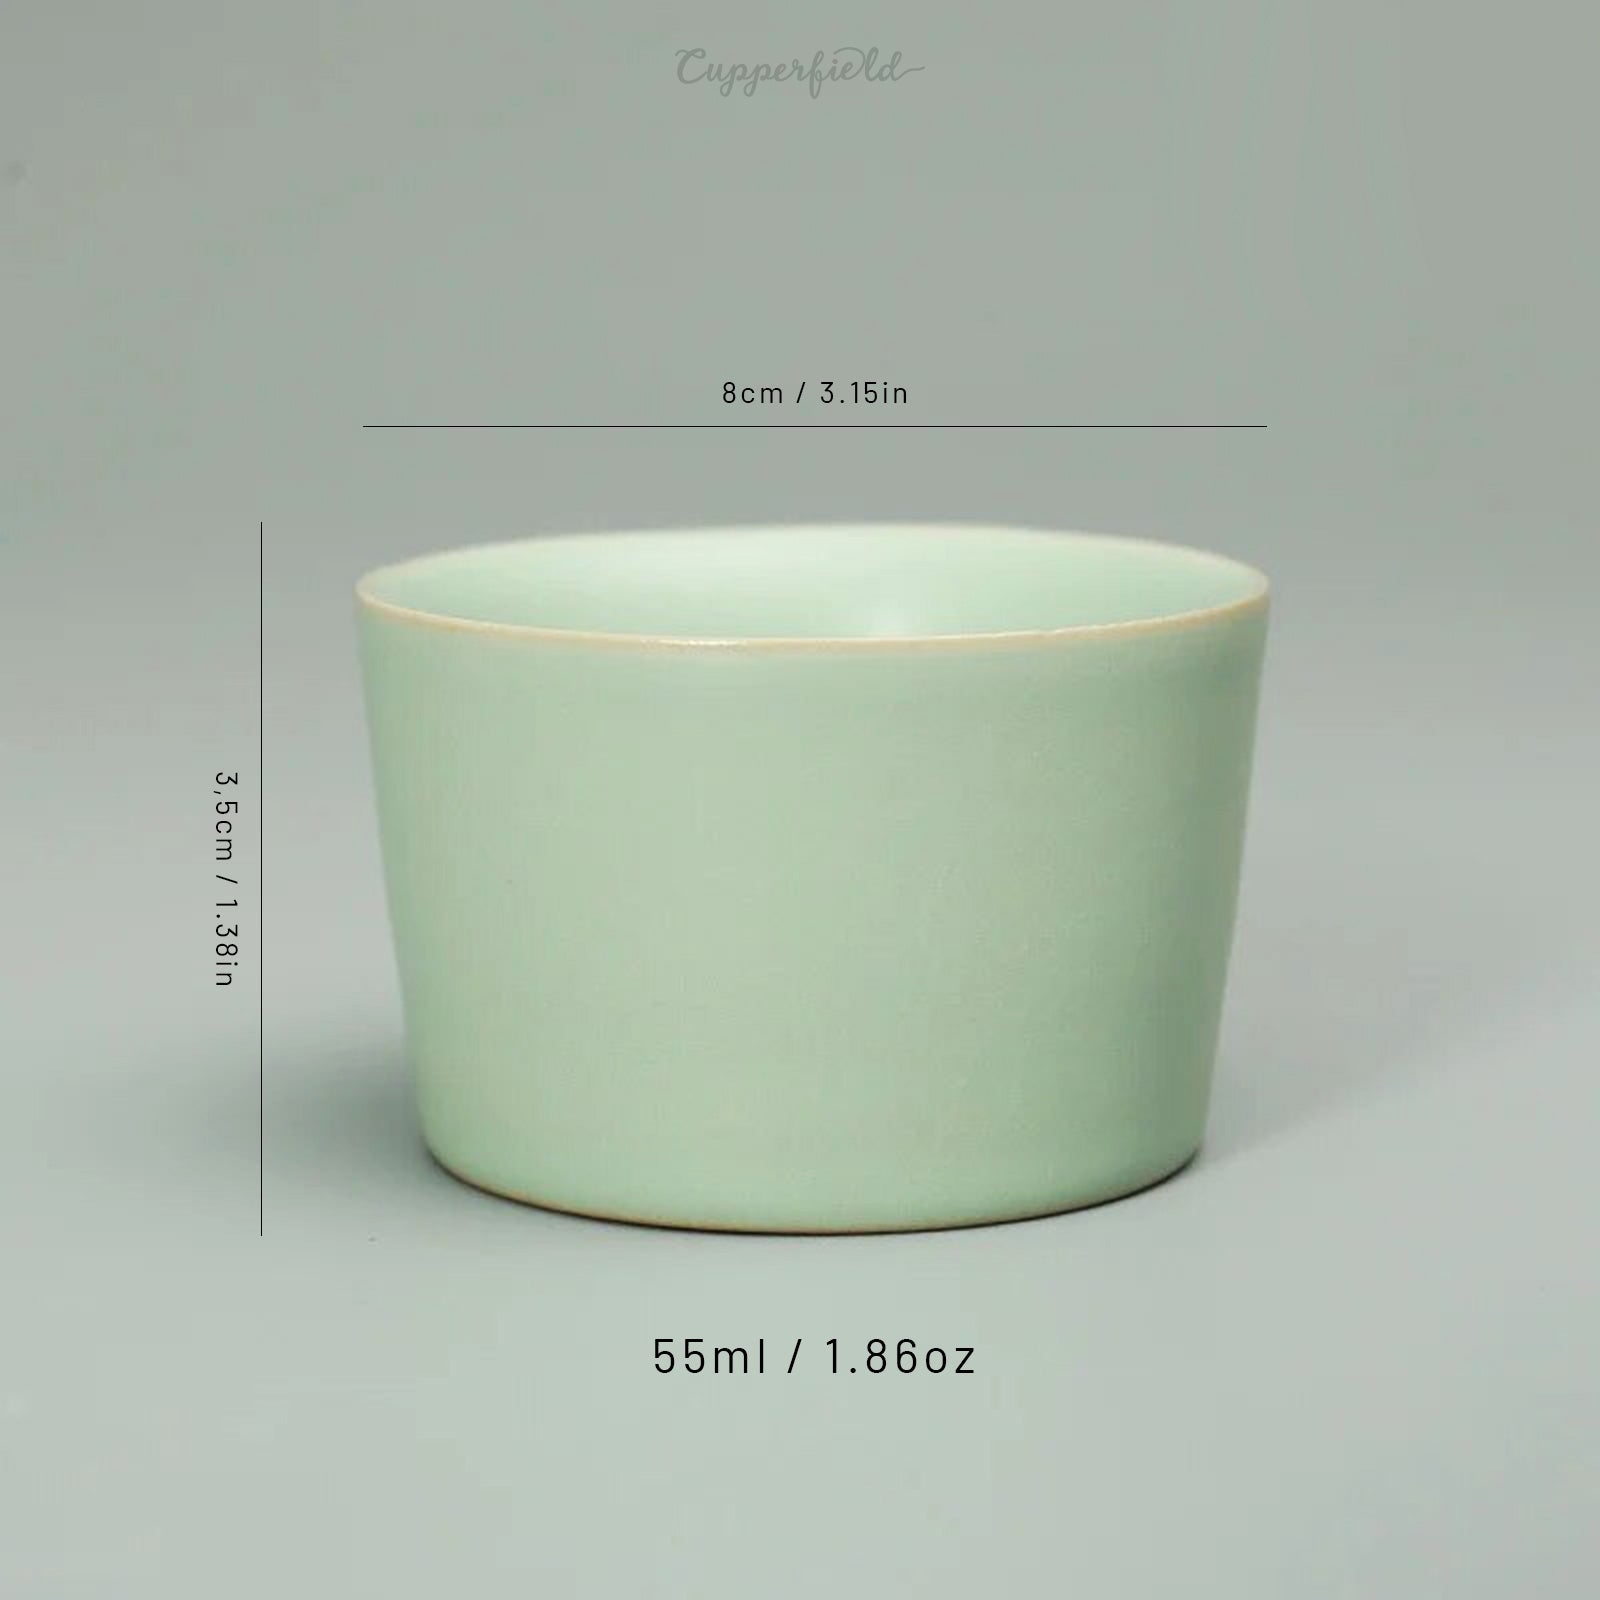 Discover 14 Retro Green Tea Cup Varieties for Your Tea Time